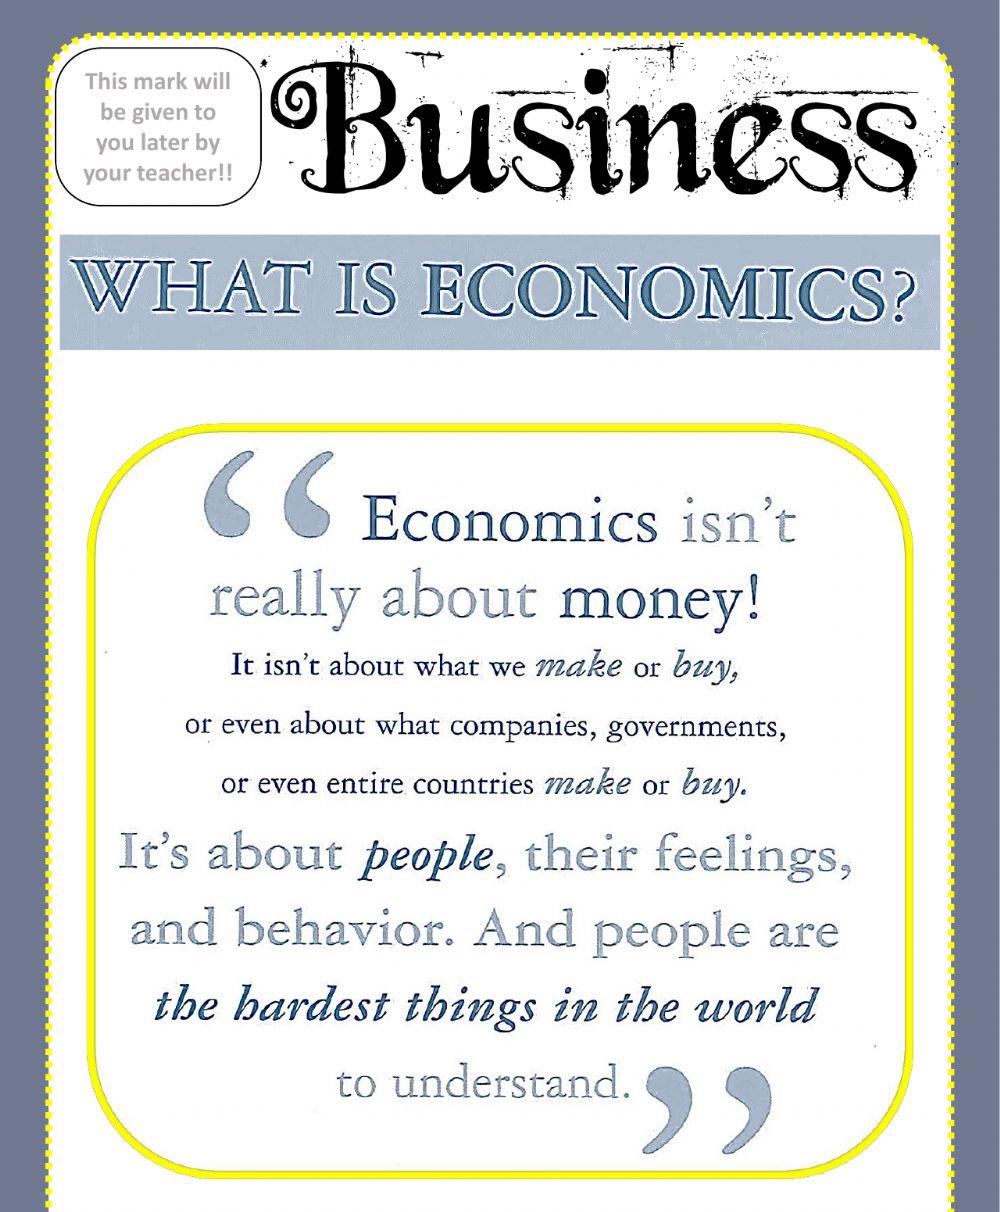 Week 19 - Business - What is Economy?